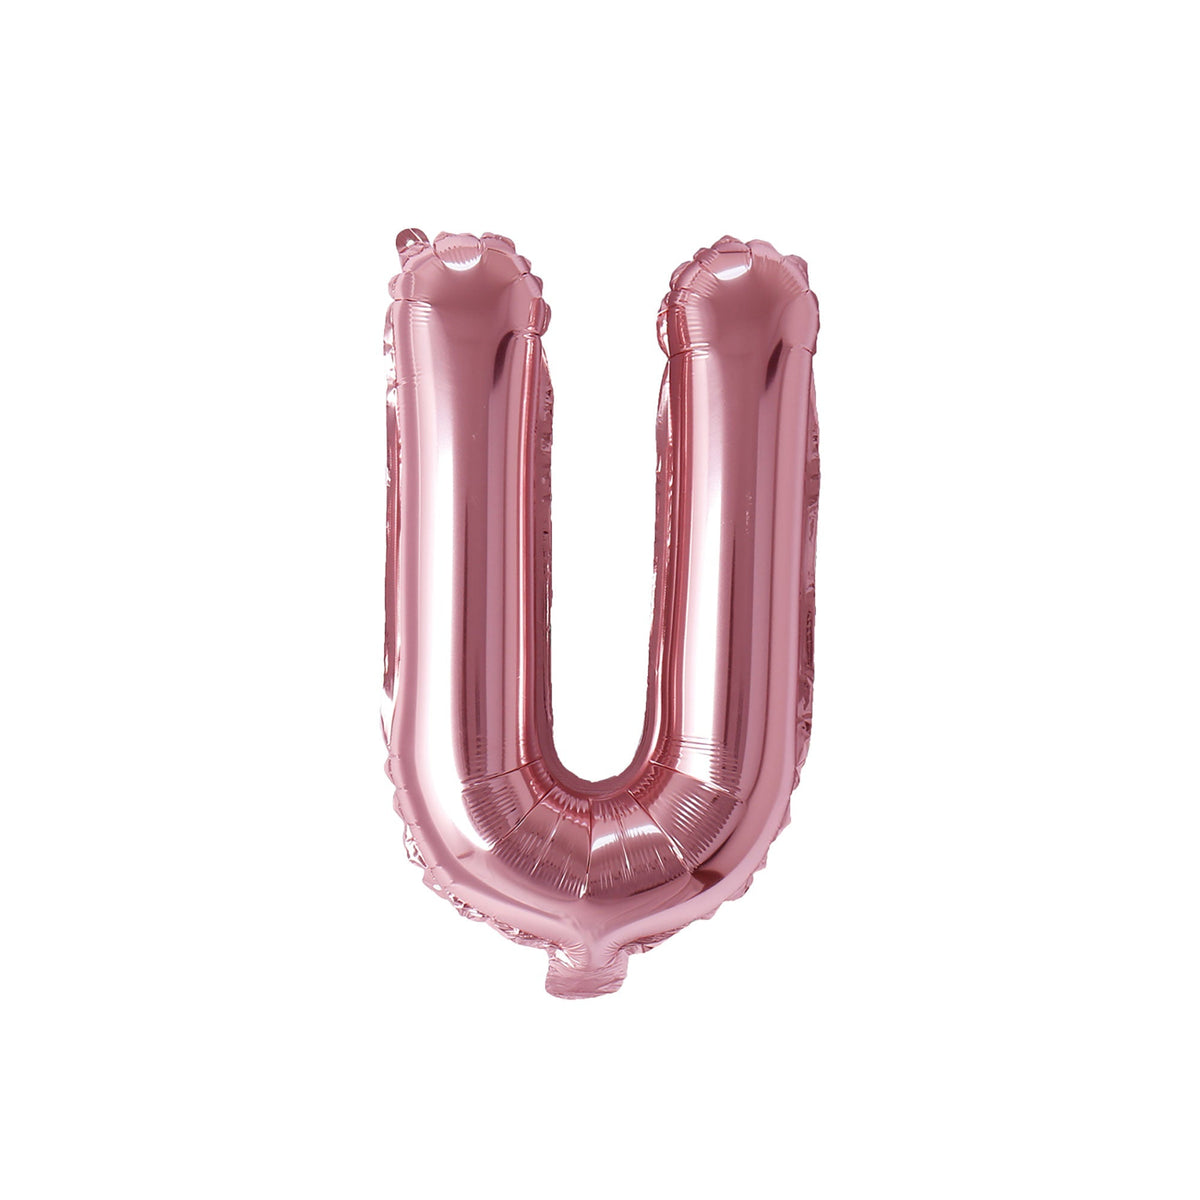 PARTY EXPERT Balloons Rose Gold Letter U Foil Balloon, 16 Inches, 1 Count 810064194399